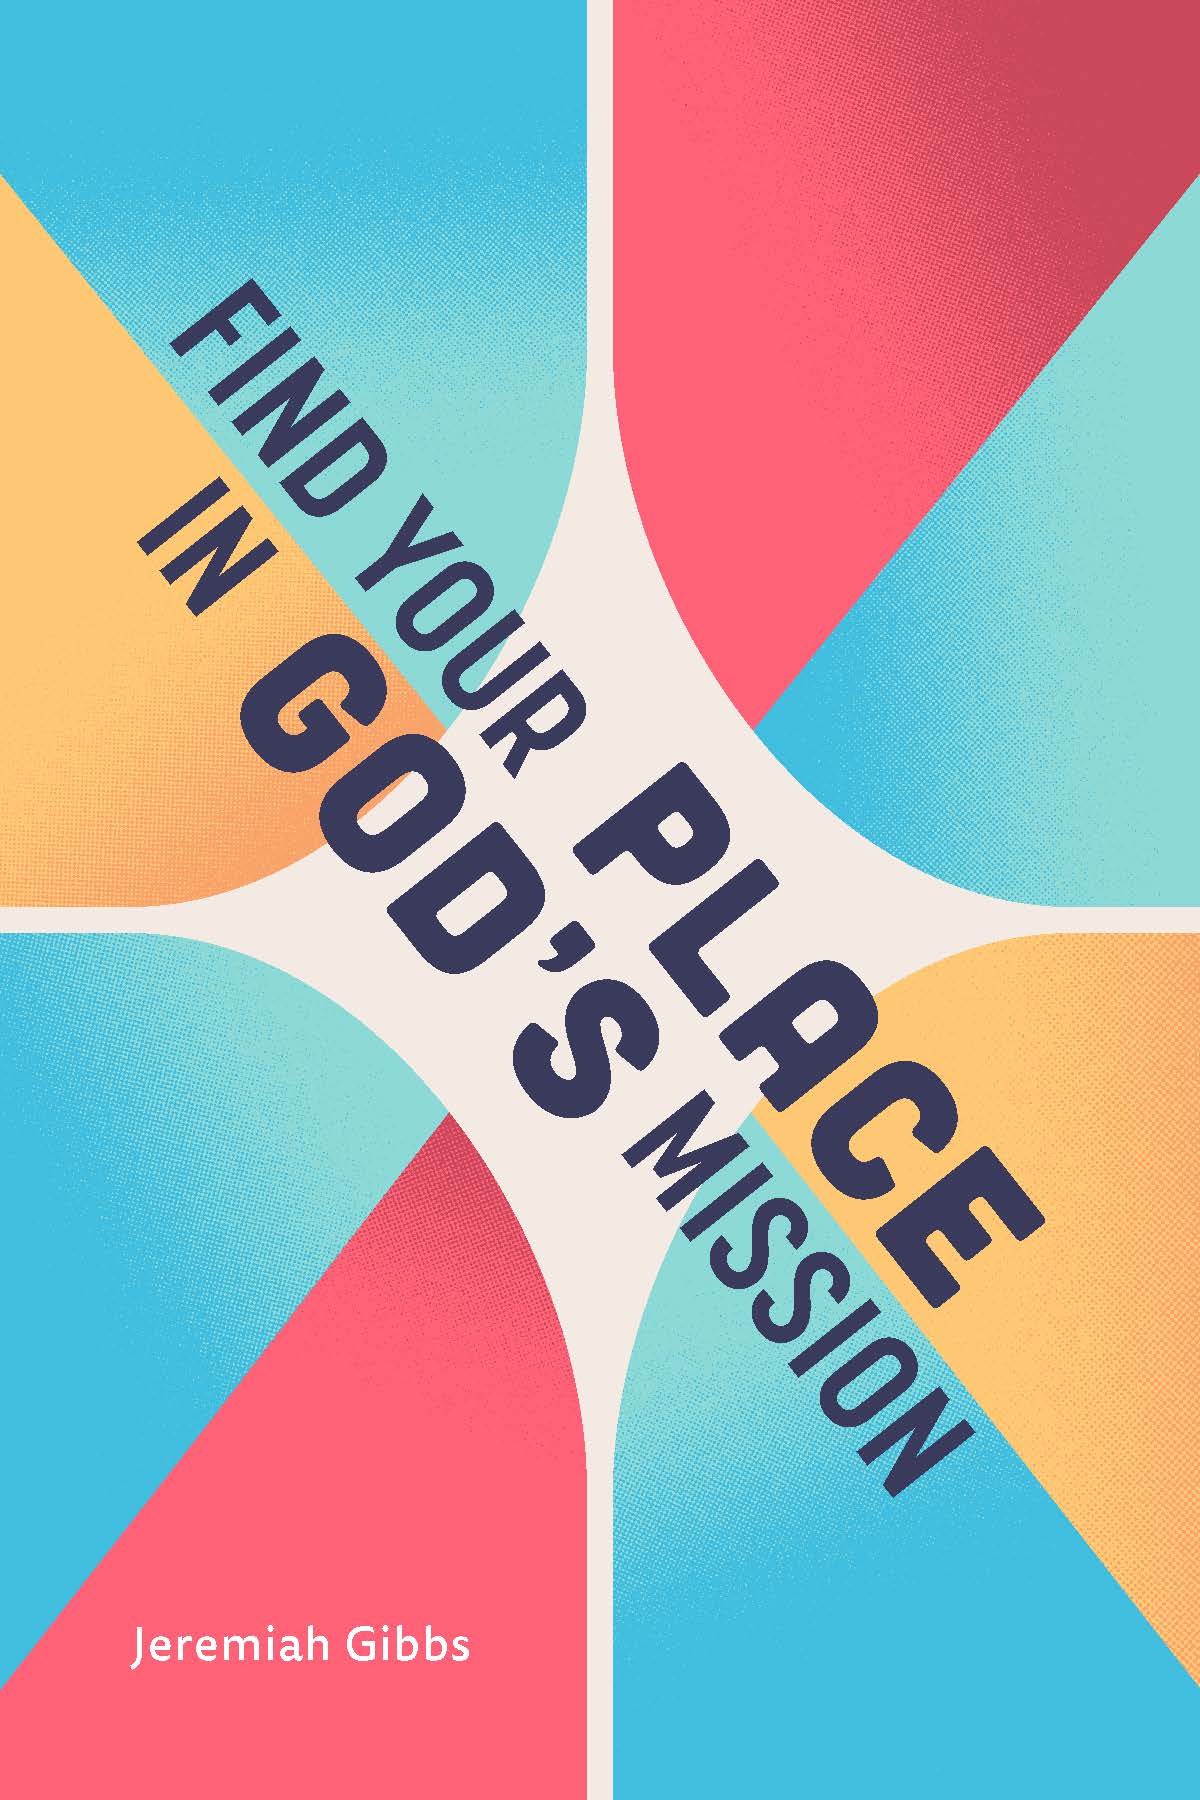 Find Your Place in God’s Mission